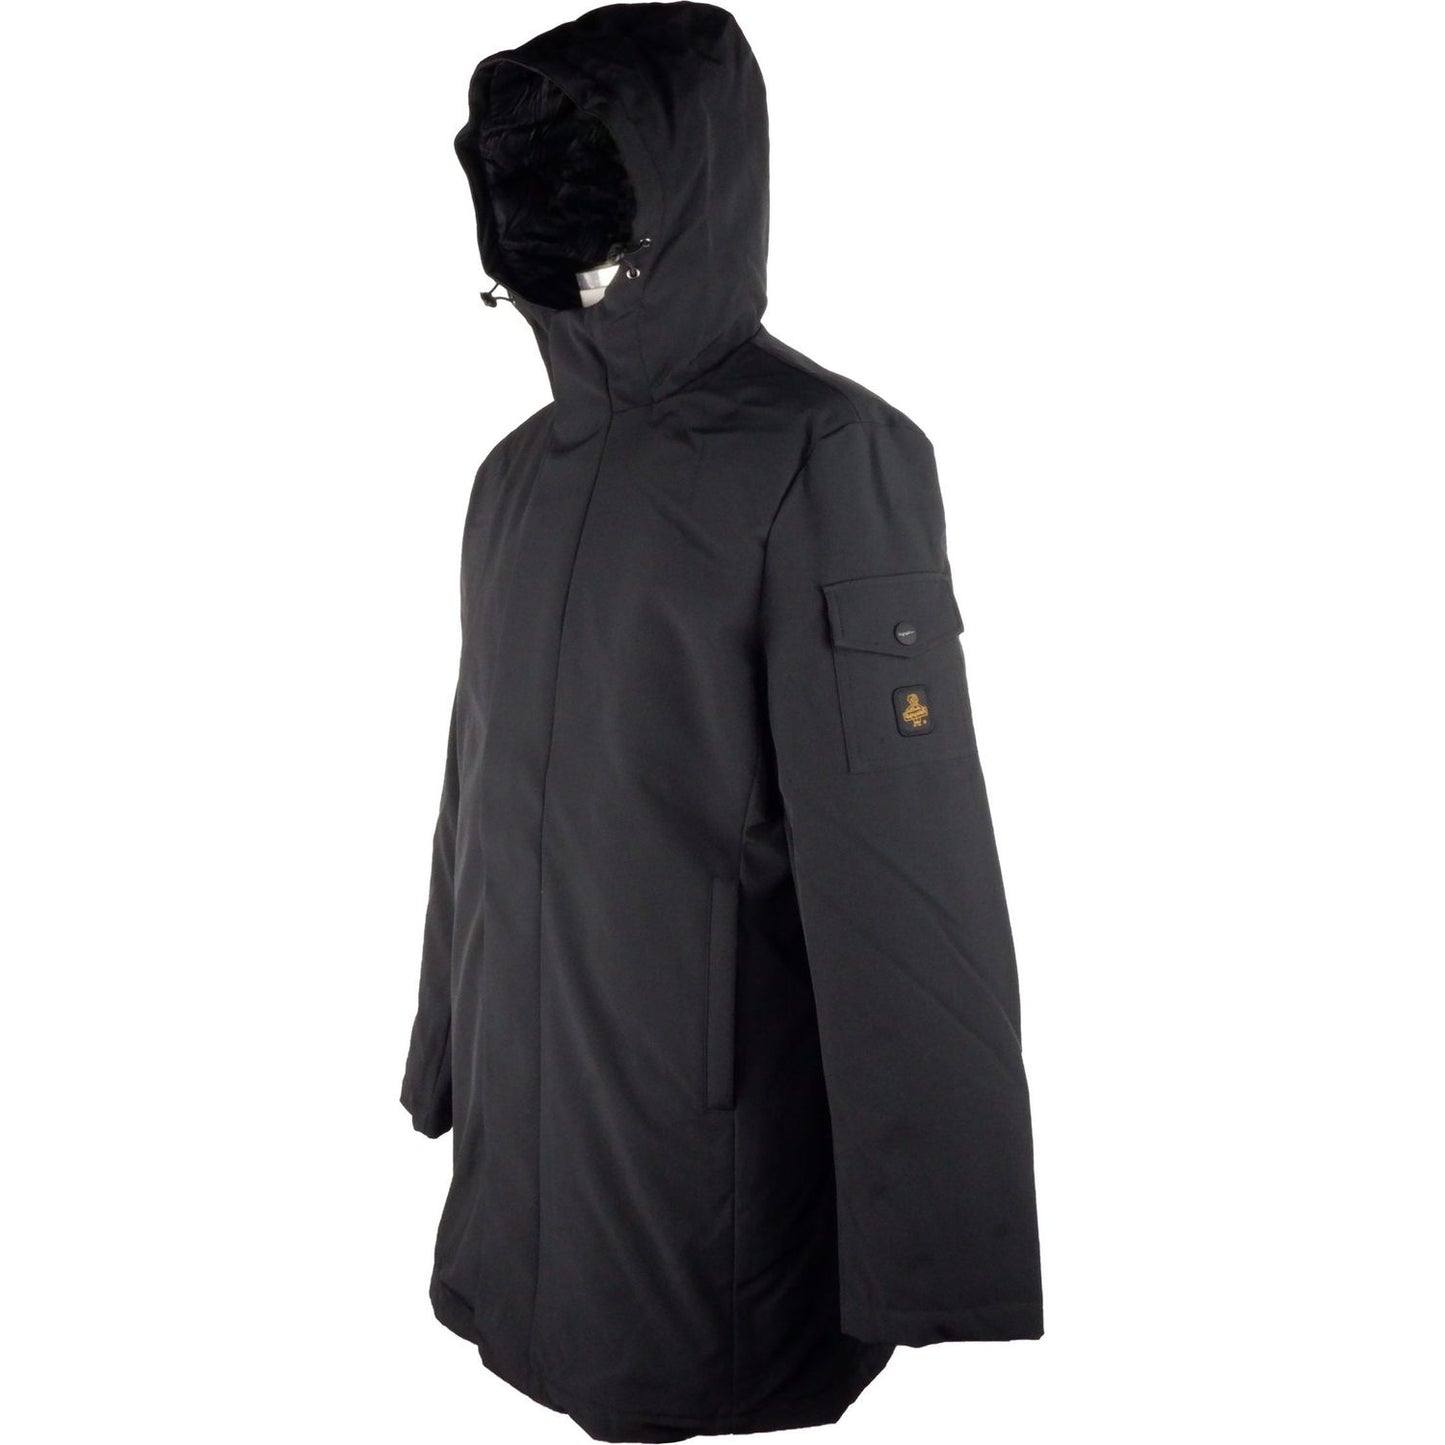 Refrigiwear Sleek Hooded Long Jacket with Zip and Button Closure black-polyester-jacket-8 stock_product_image_5263_296351819-38-scaled-dc0668f7-11e.jpg